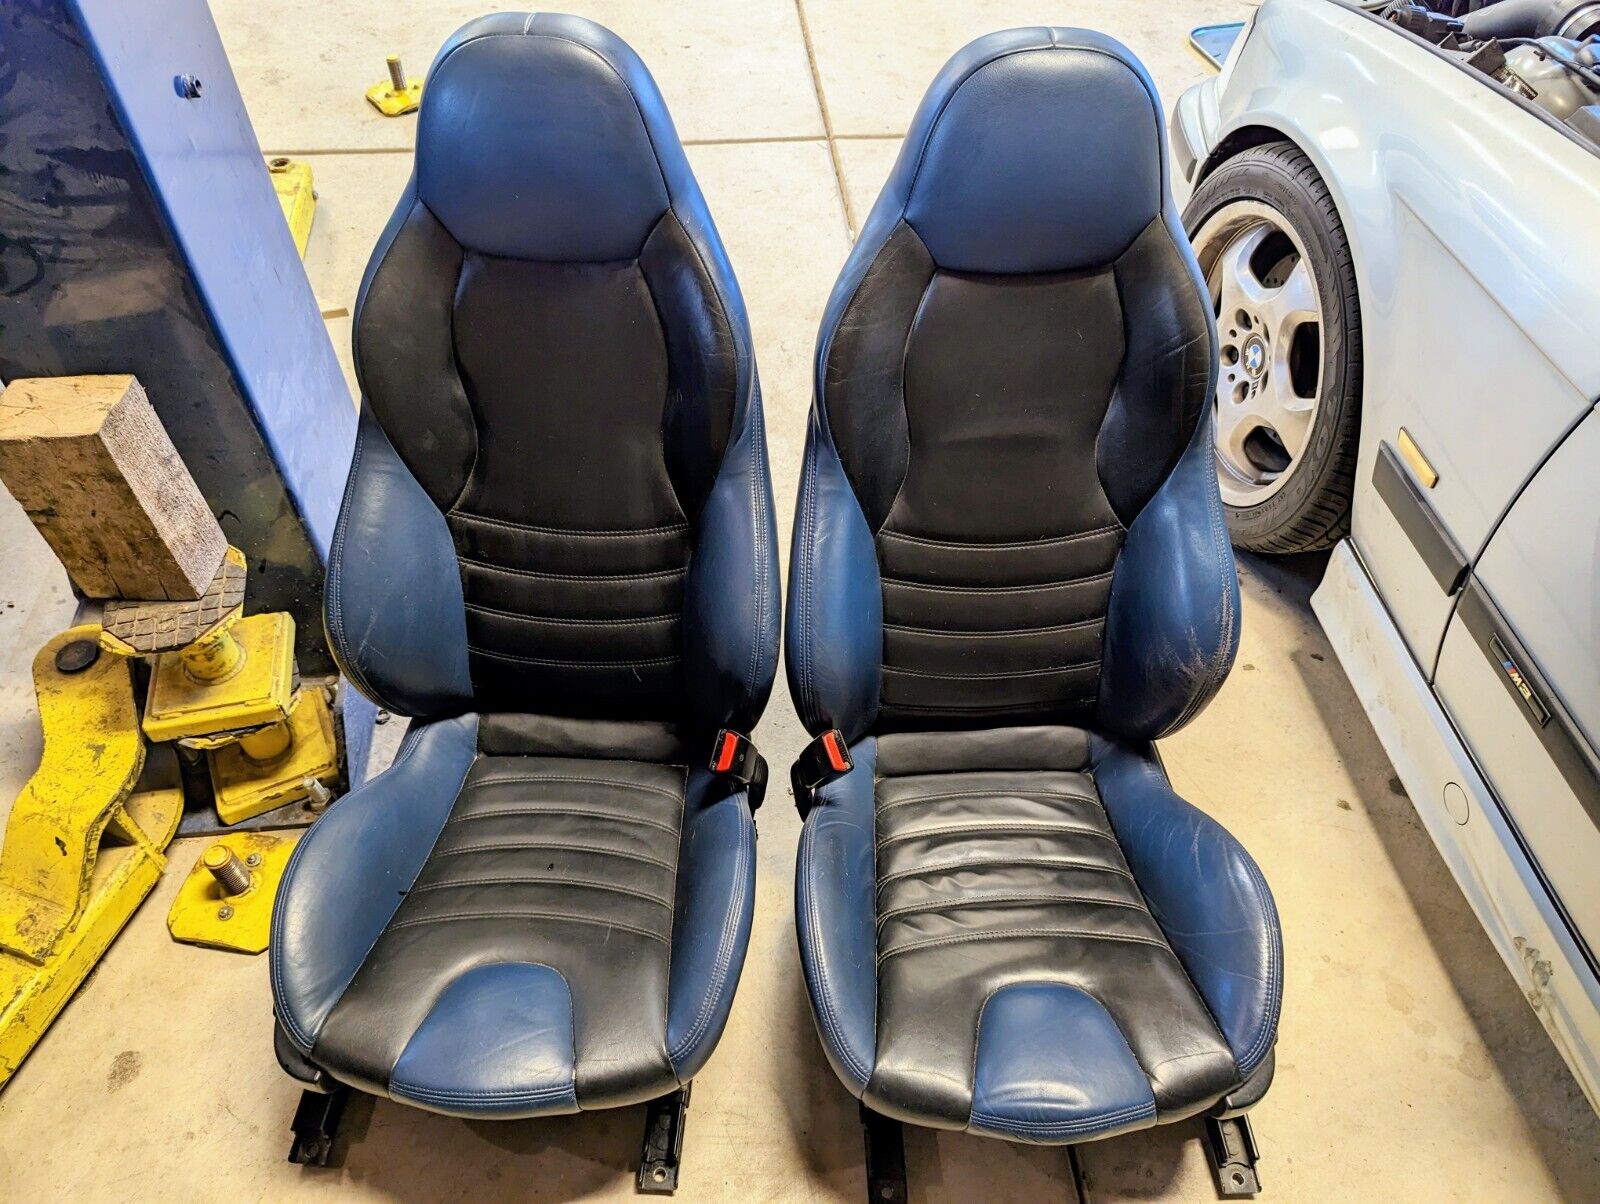 Z3m coupe front power heated seats blue/black 